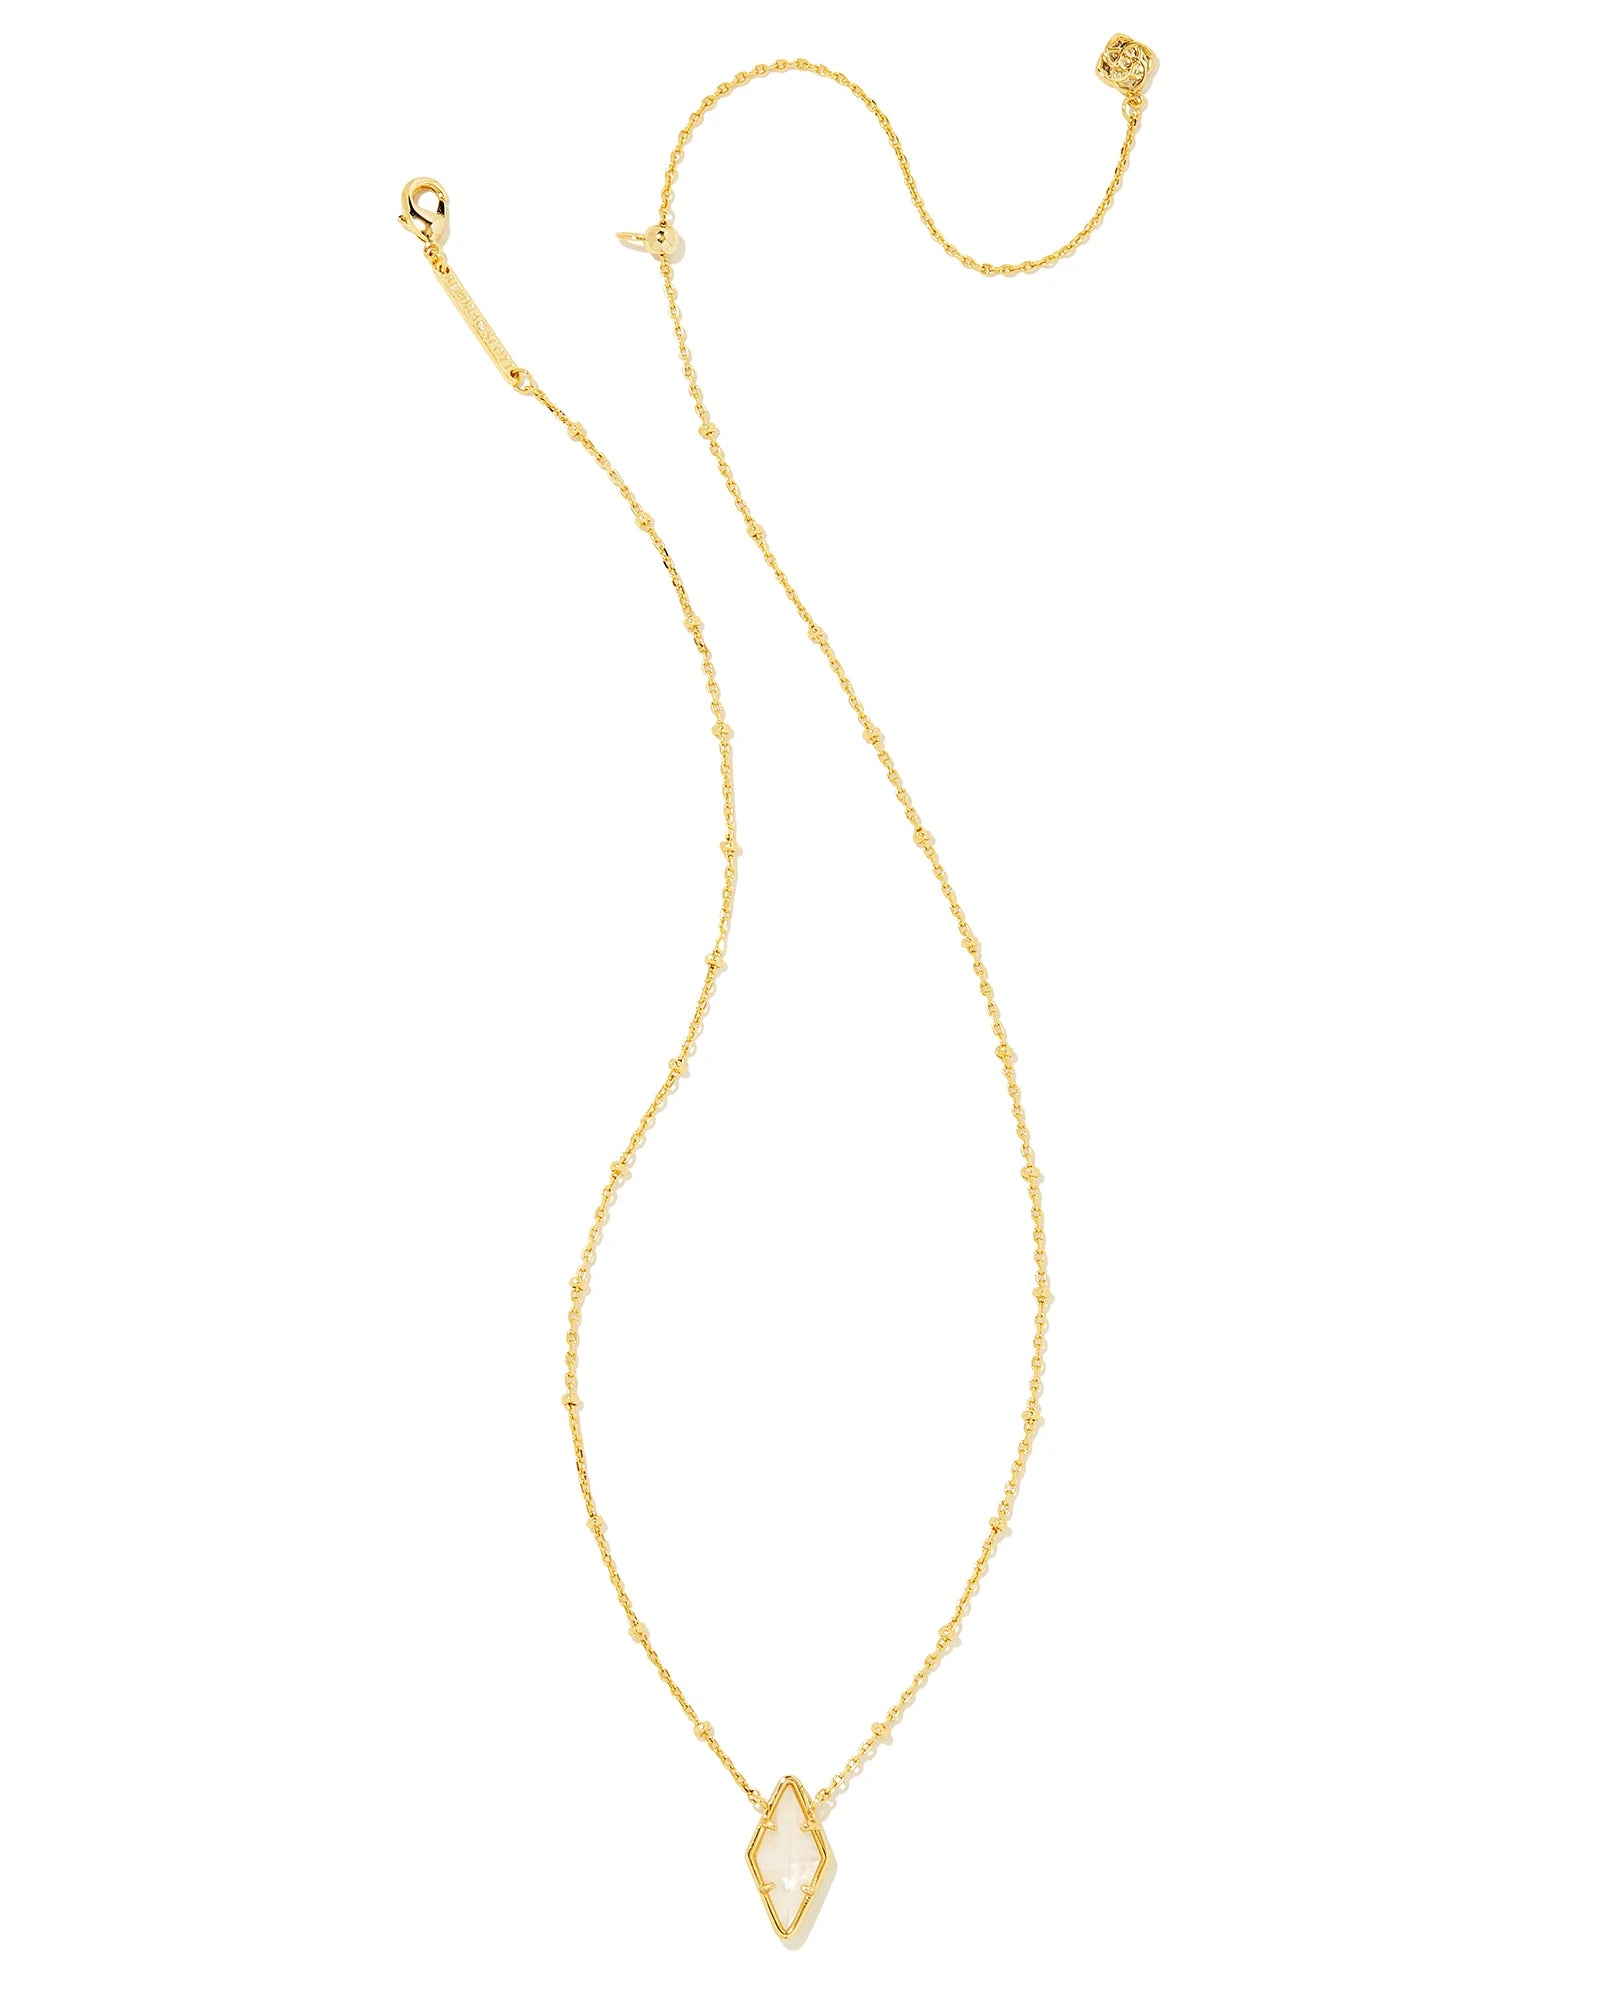 Kendra Scott Kinsley Short Pendant Necklace Gold Ivory Mother of Pearl-Necklaces-Kendra Scott-N00329GLD-The Twisted Chandelier